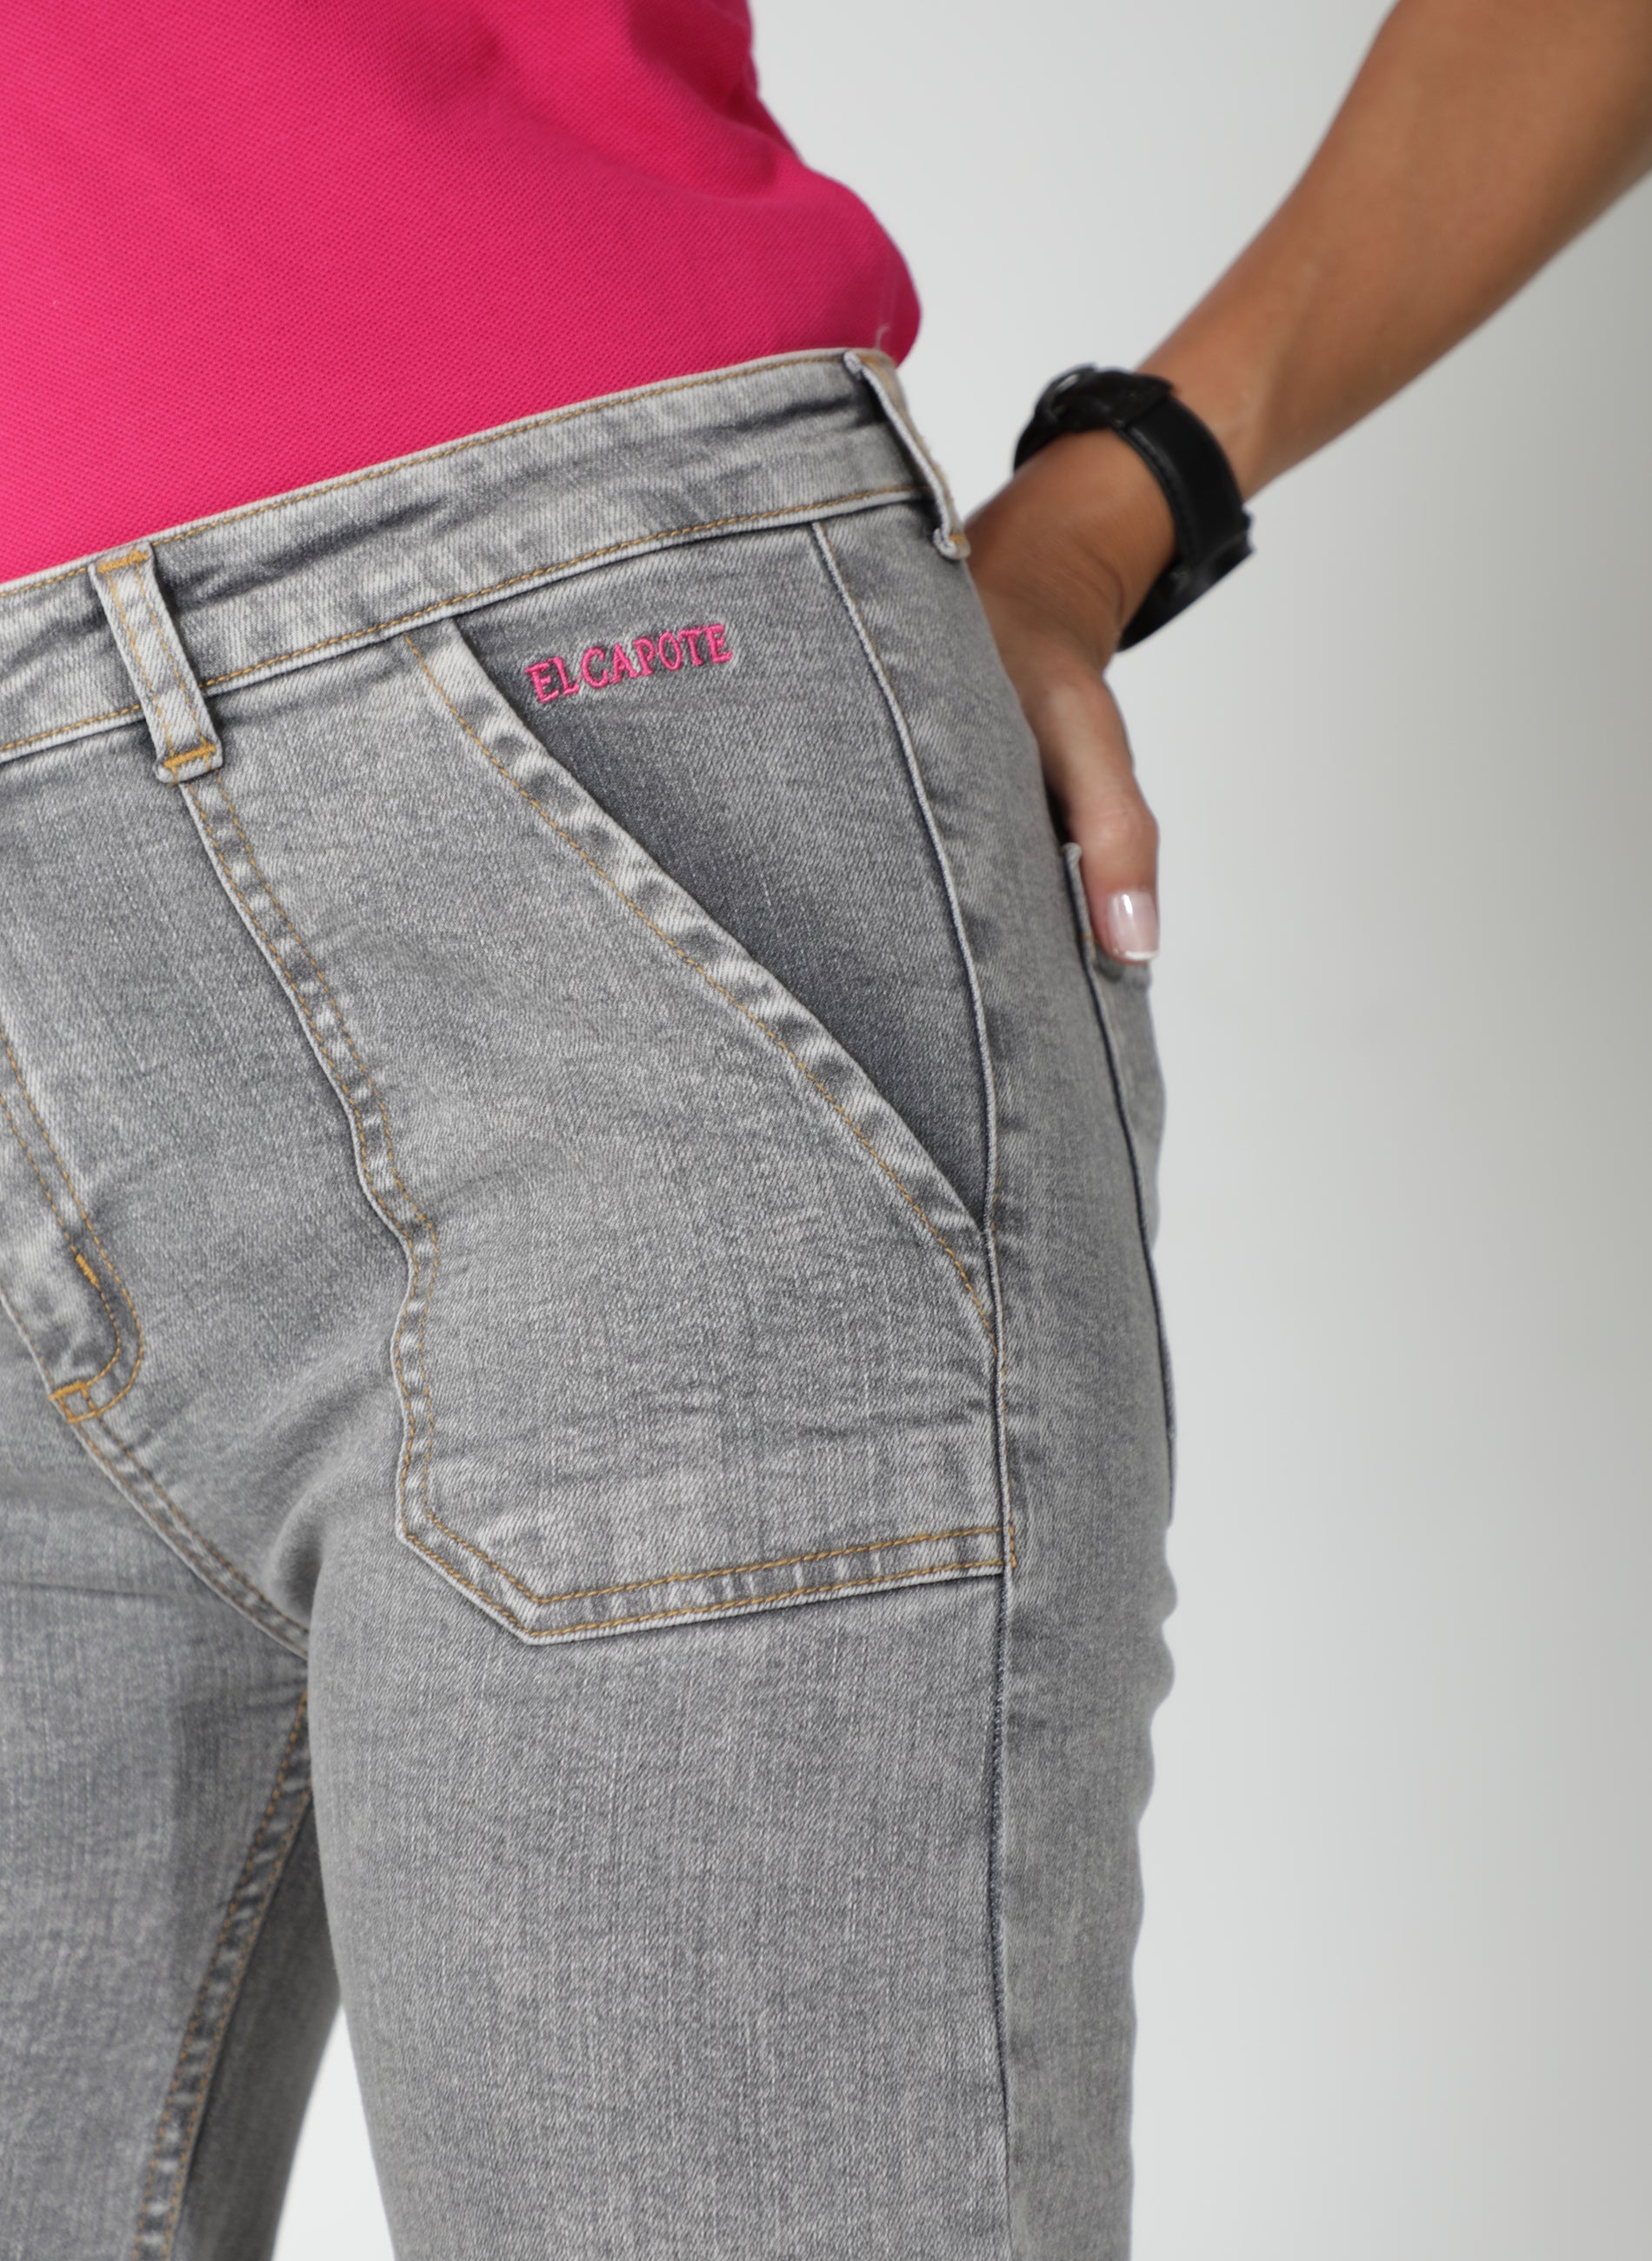 Women's Gray Front Pockets Jeans